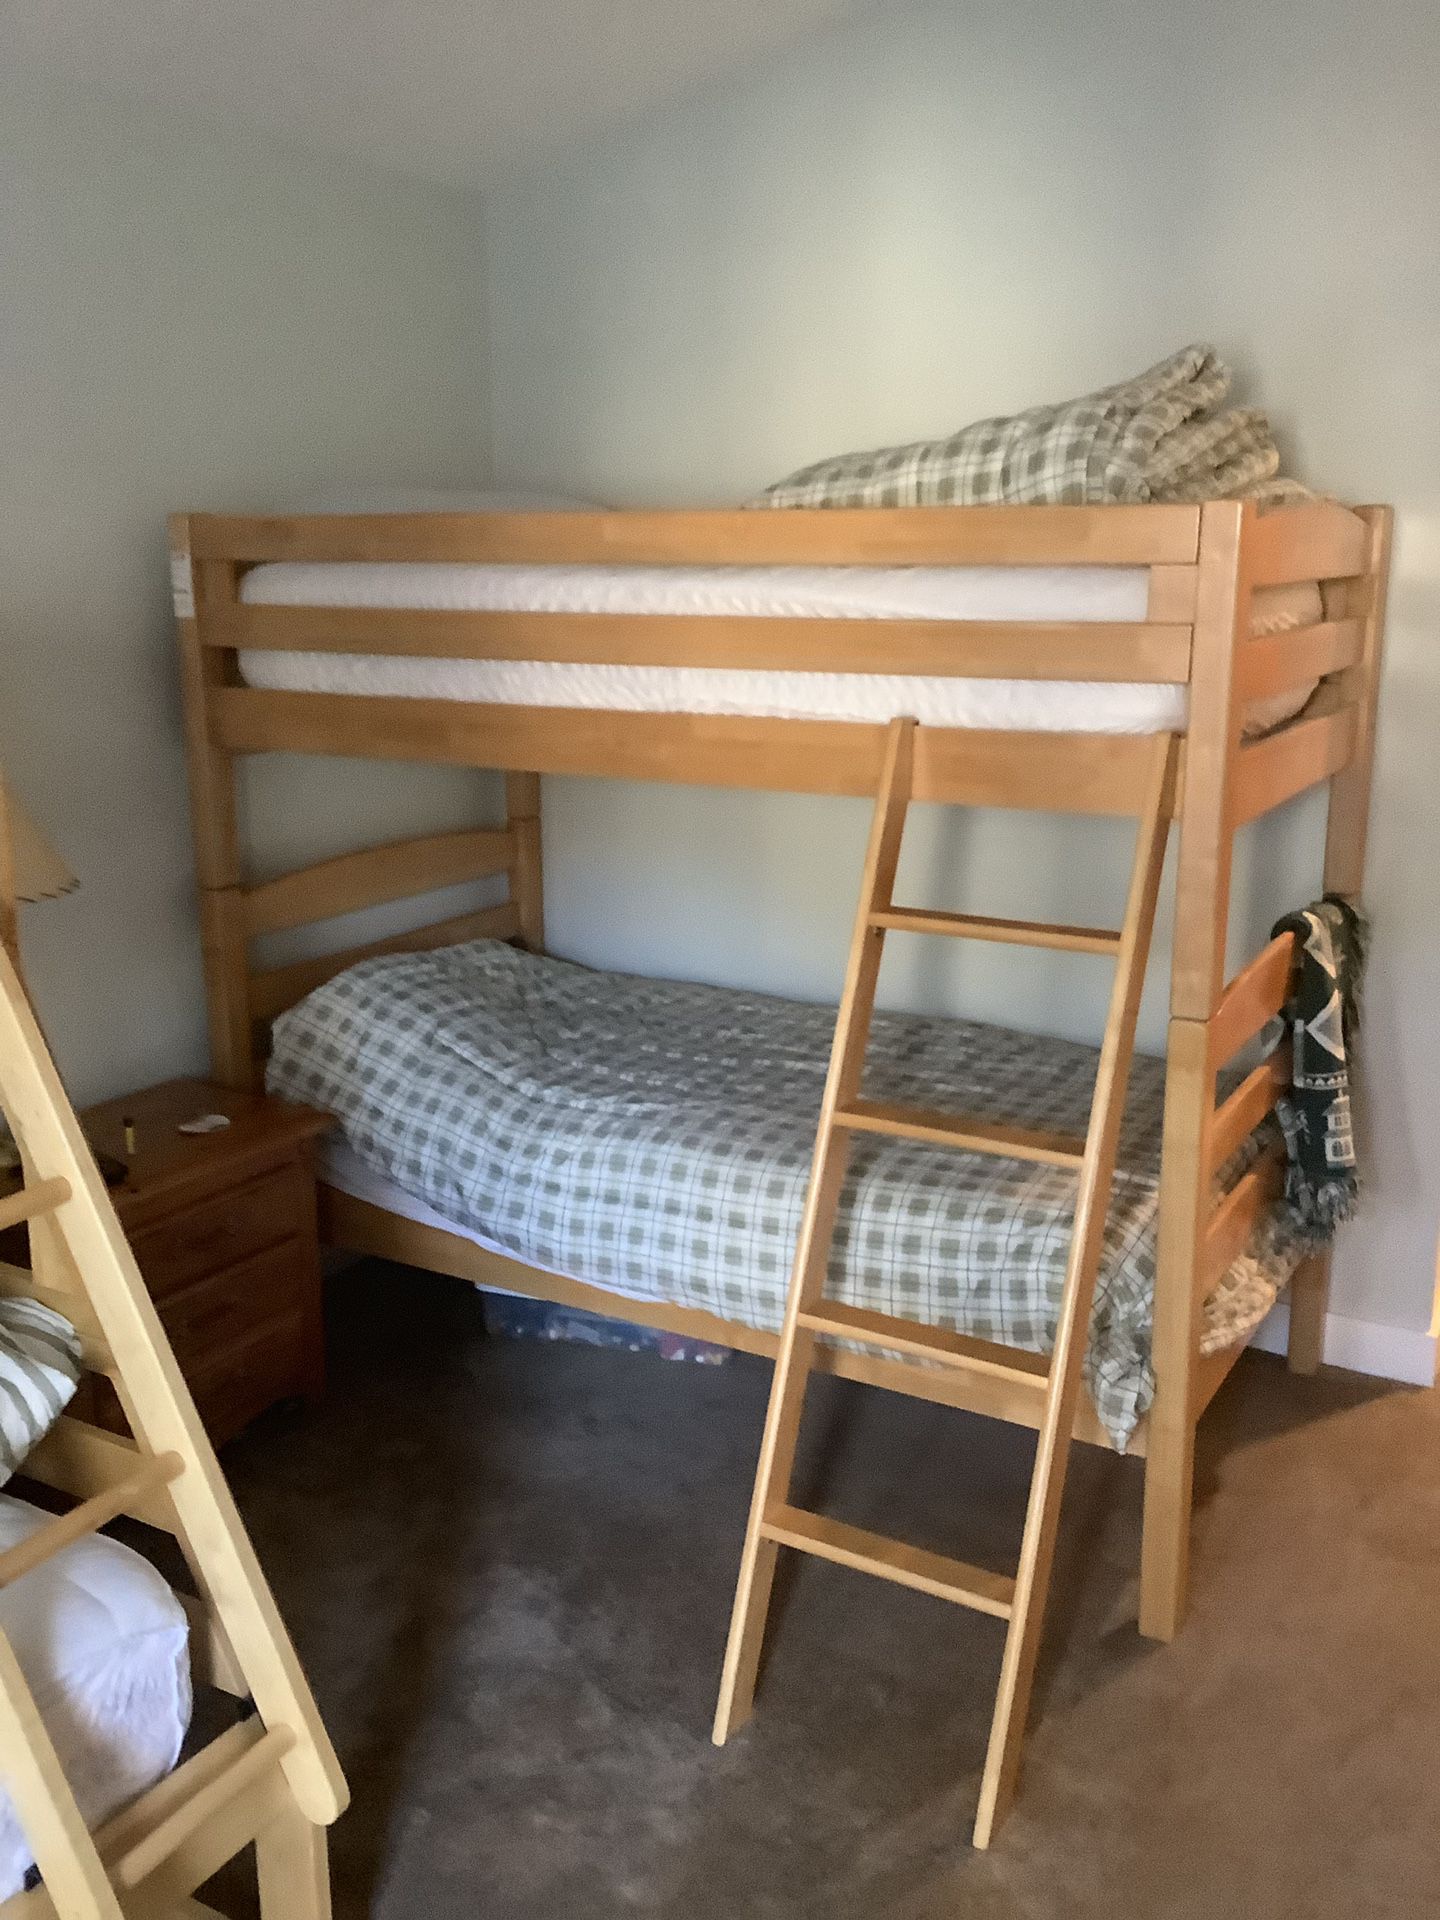 One Bunk bed frame with mattresses and bedding...